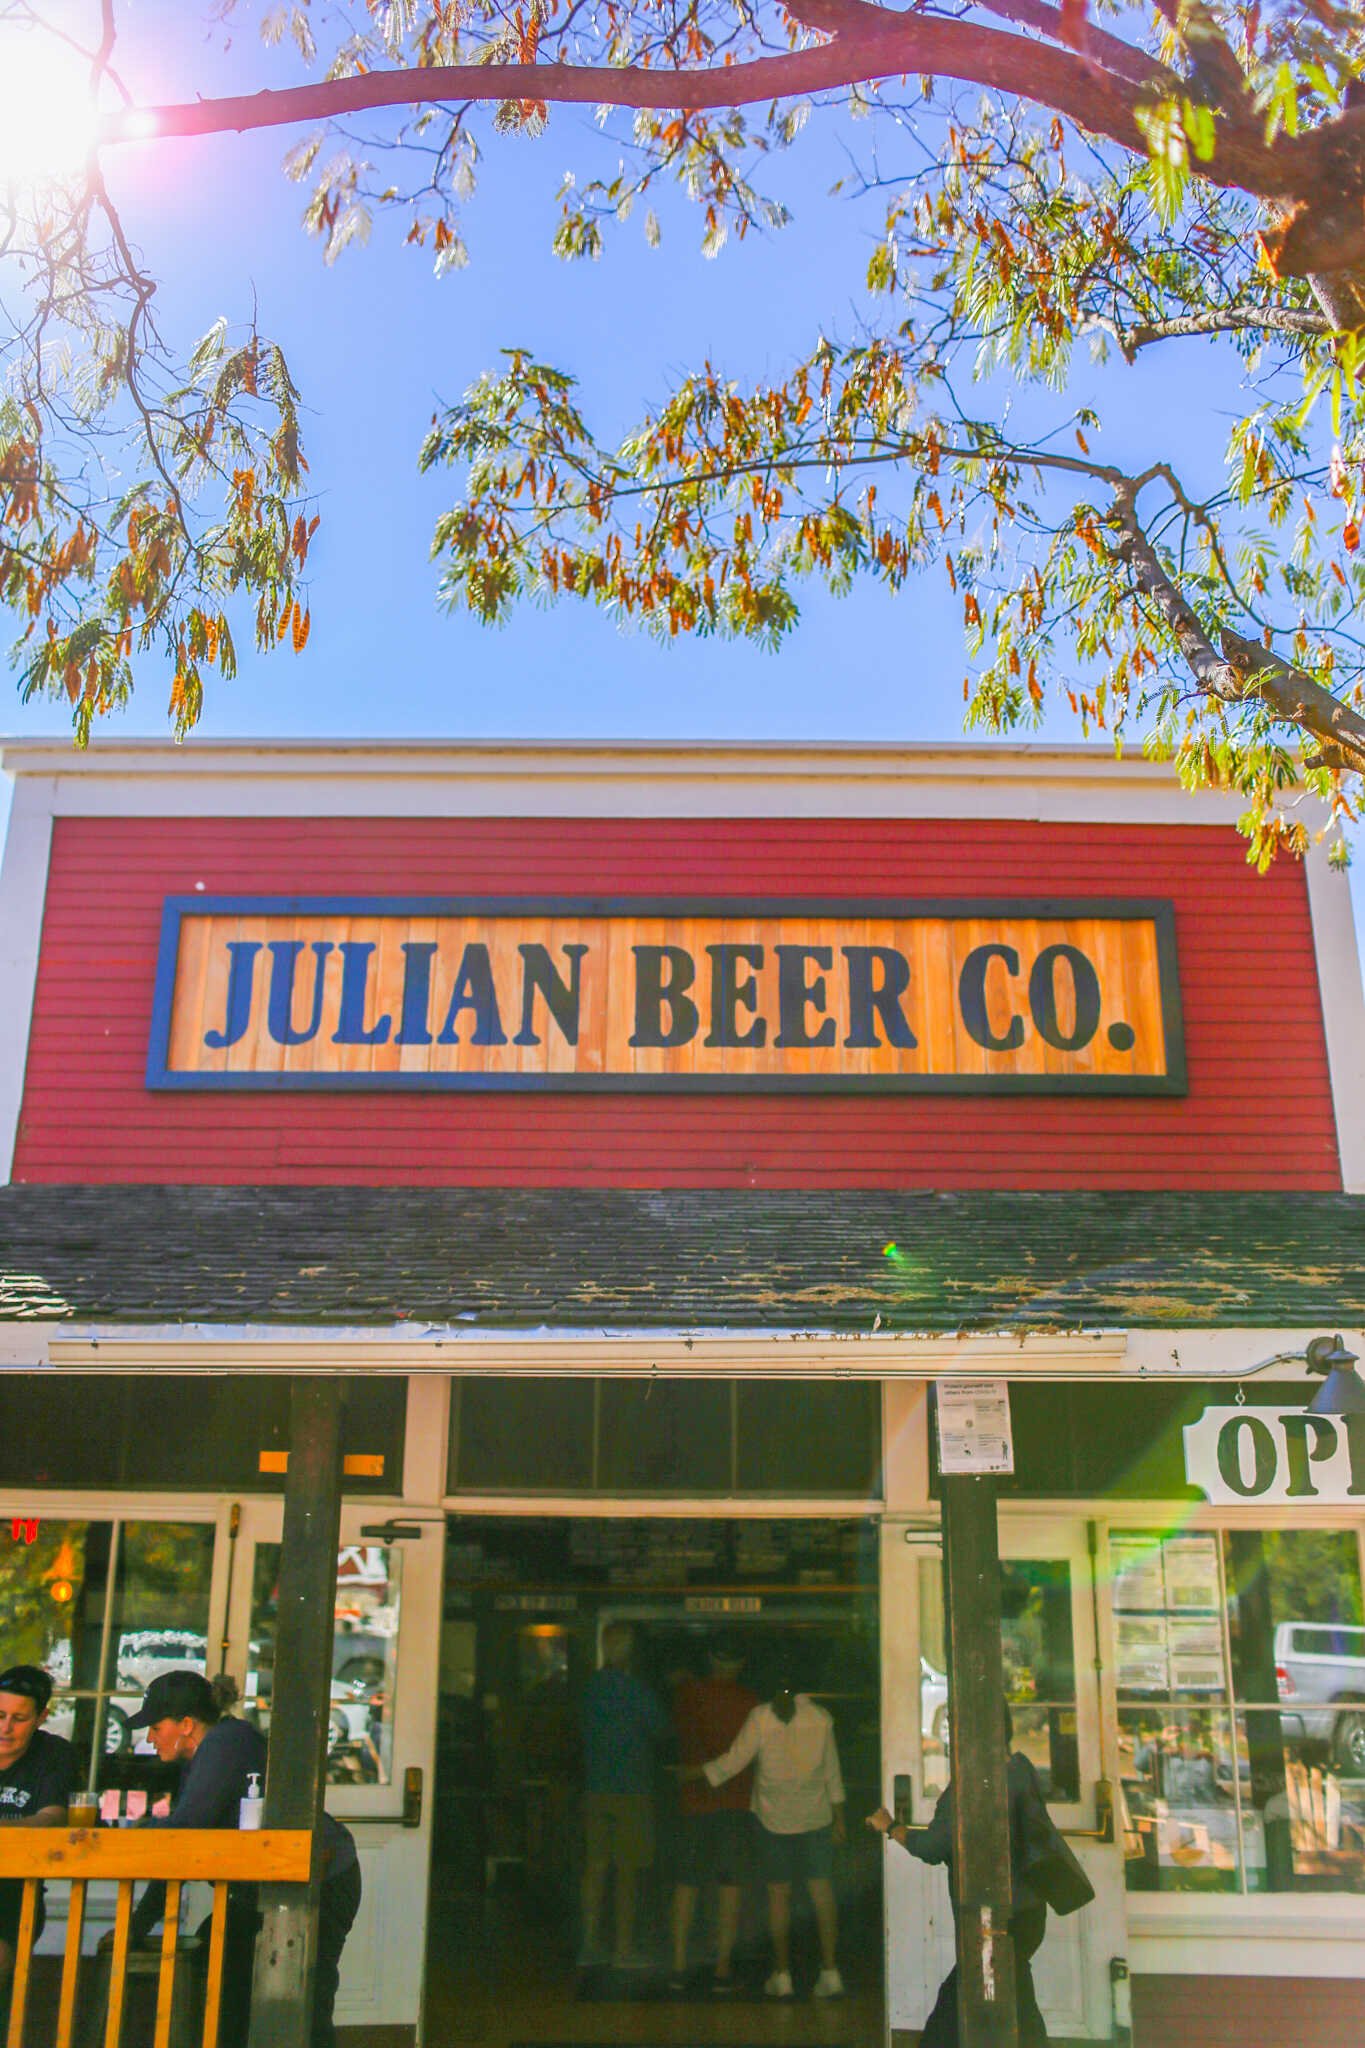 The Complete Travel Guide to Julian, California - Julian Beer Company restaurant.